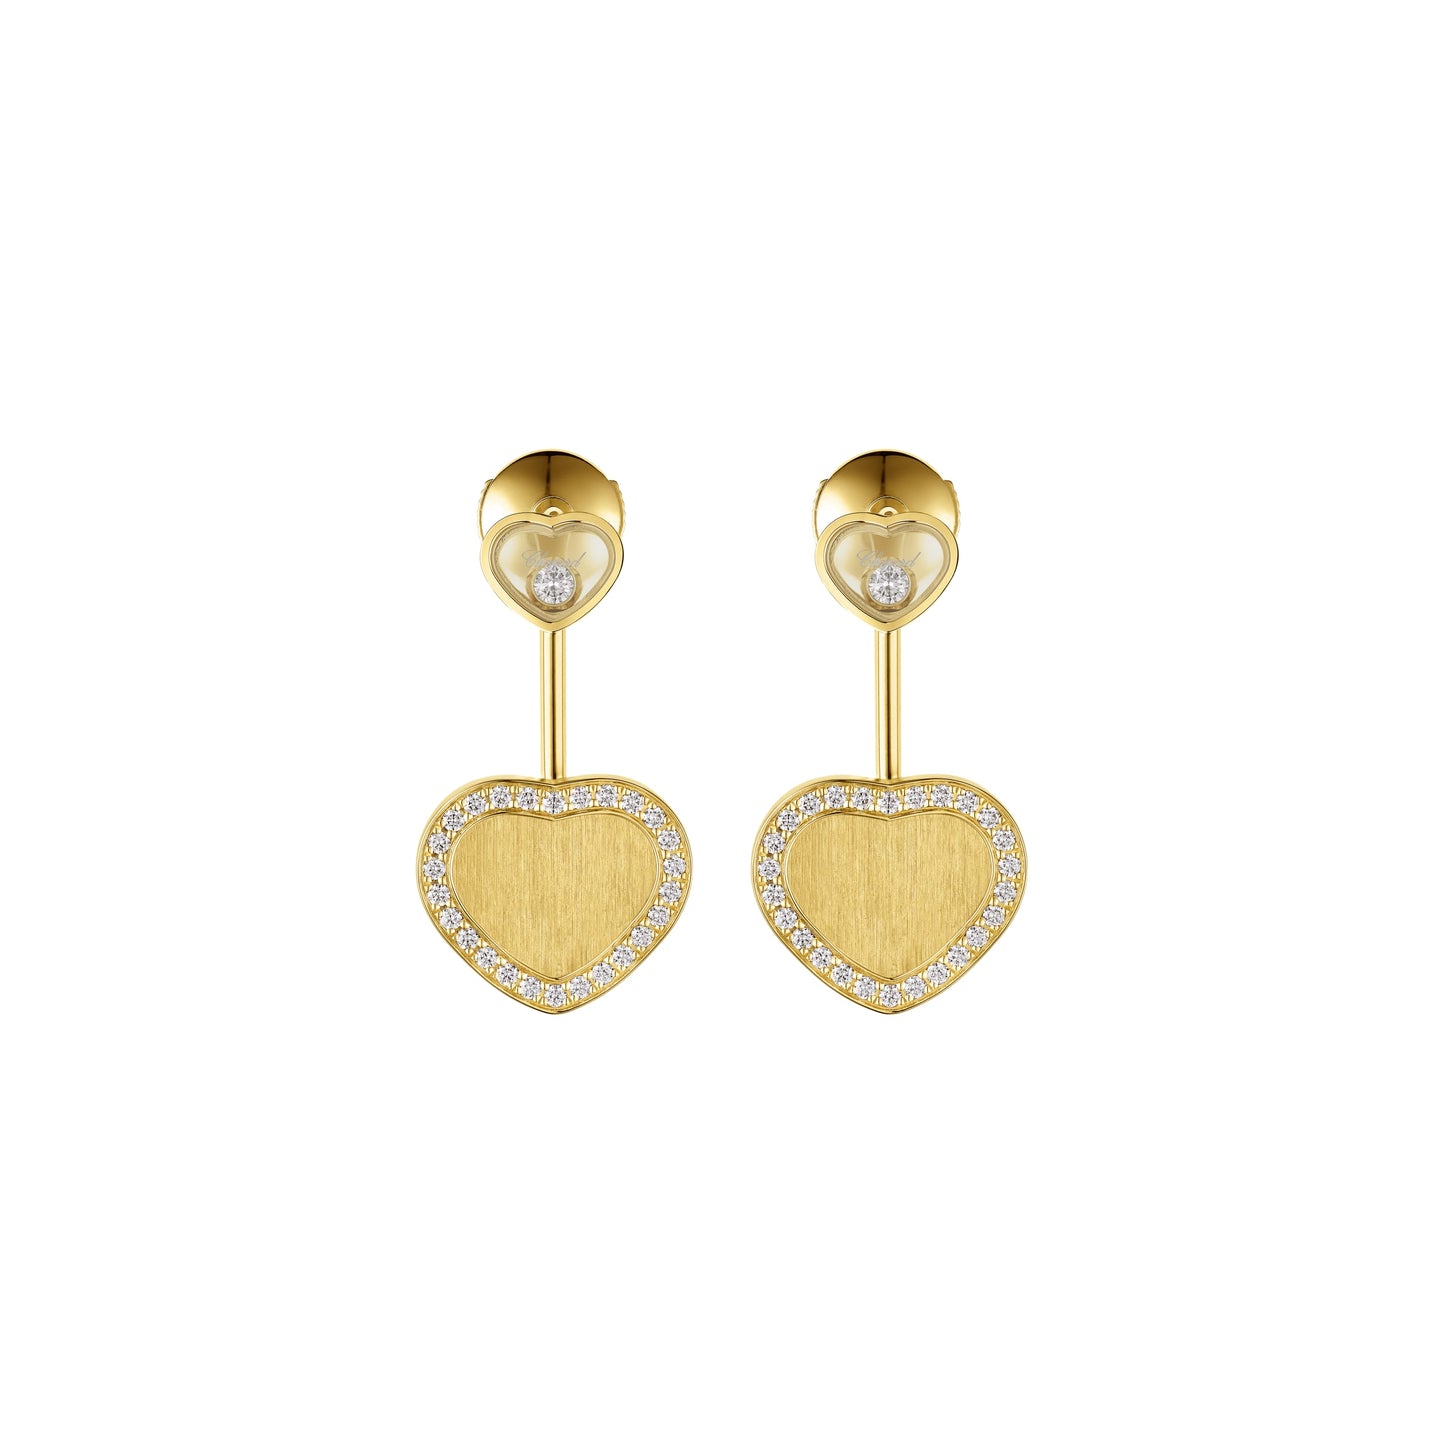 HAPPY HEARTS GOLDEN HEARTS EARRINGS, ETHICAL YELLOW GOLD, DIAMONDS 83A107-0921